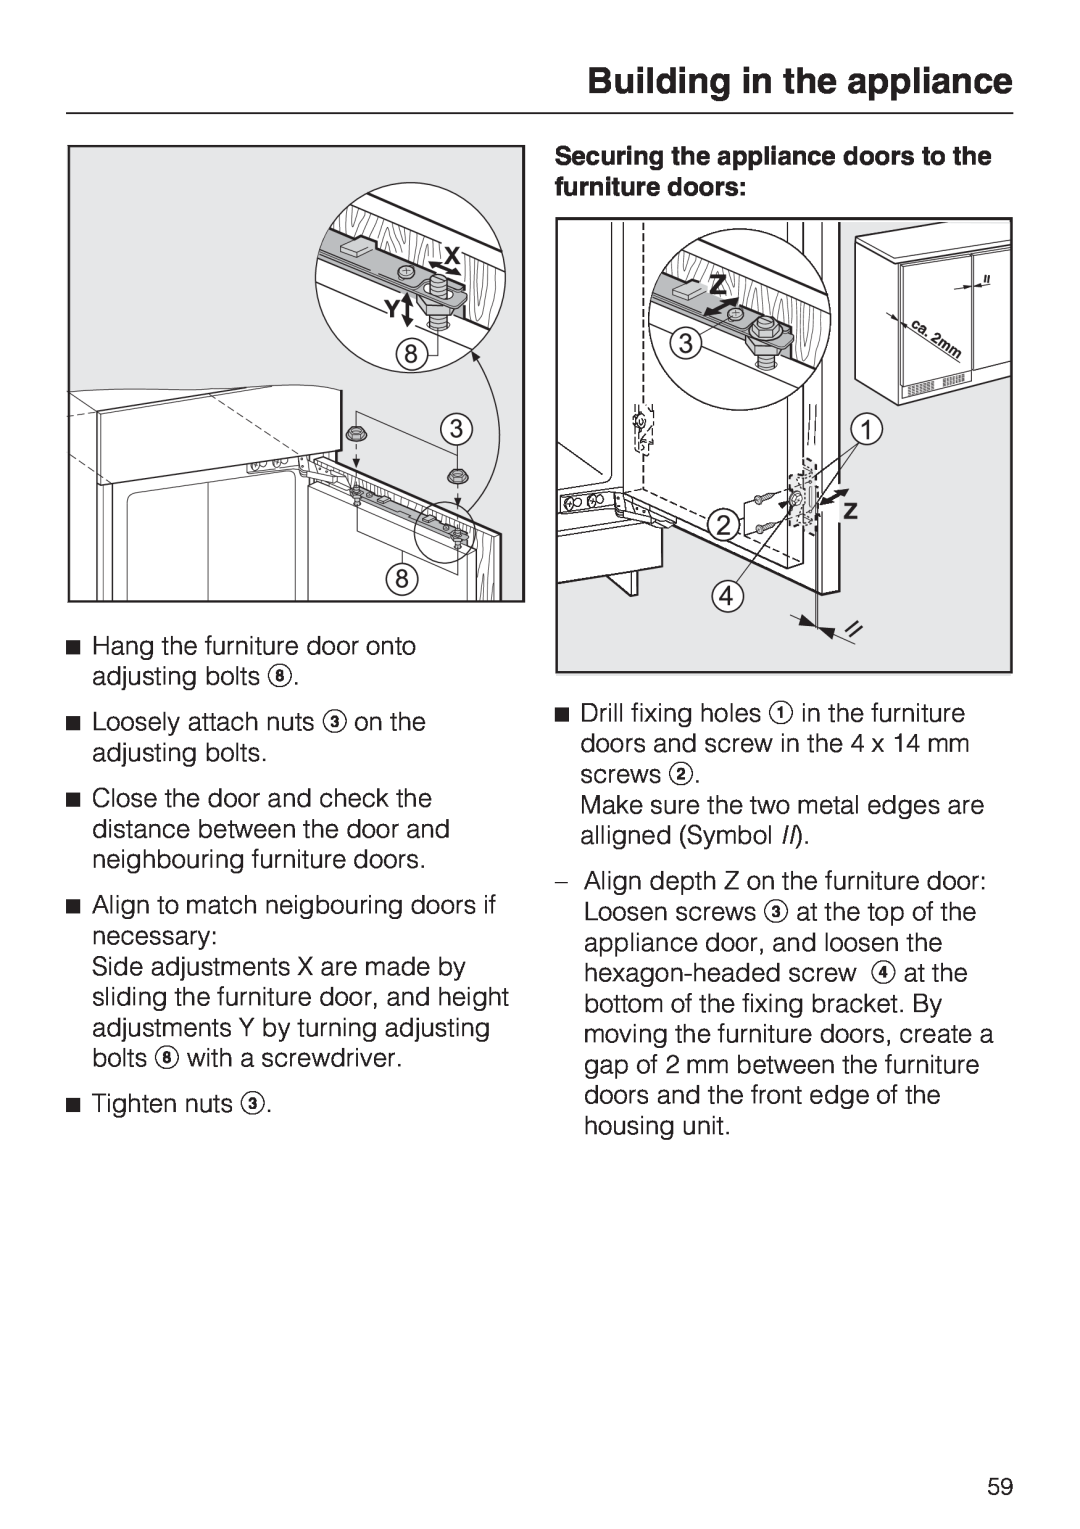 Miele KF 9757 ID installation instructions Building in the appliance, Hang the furniture door onto adjusting bolts h 